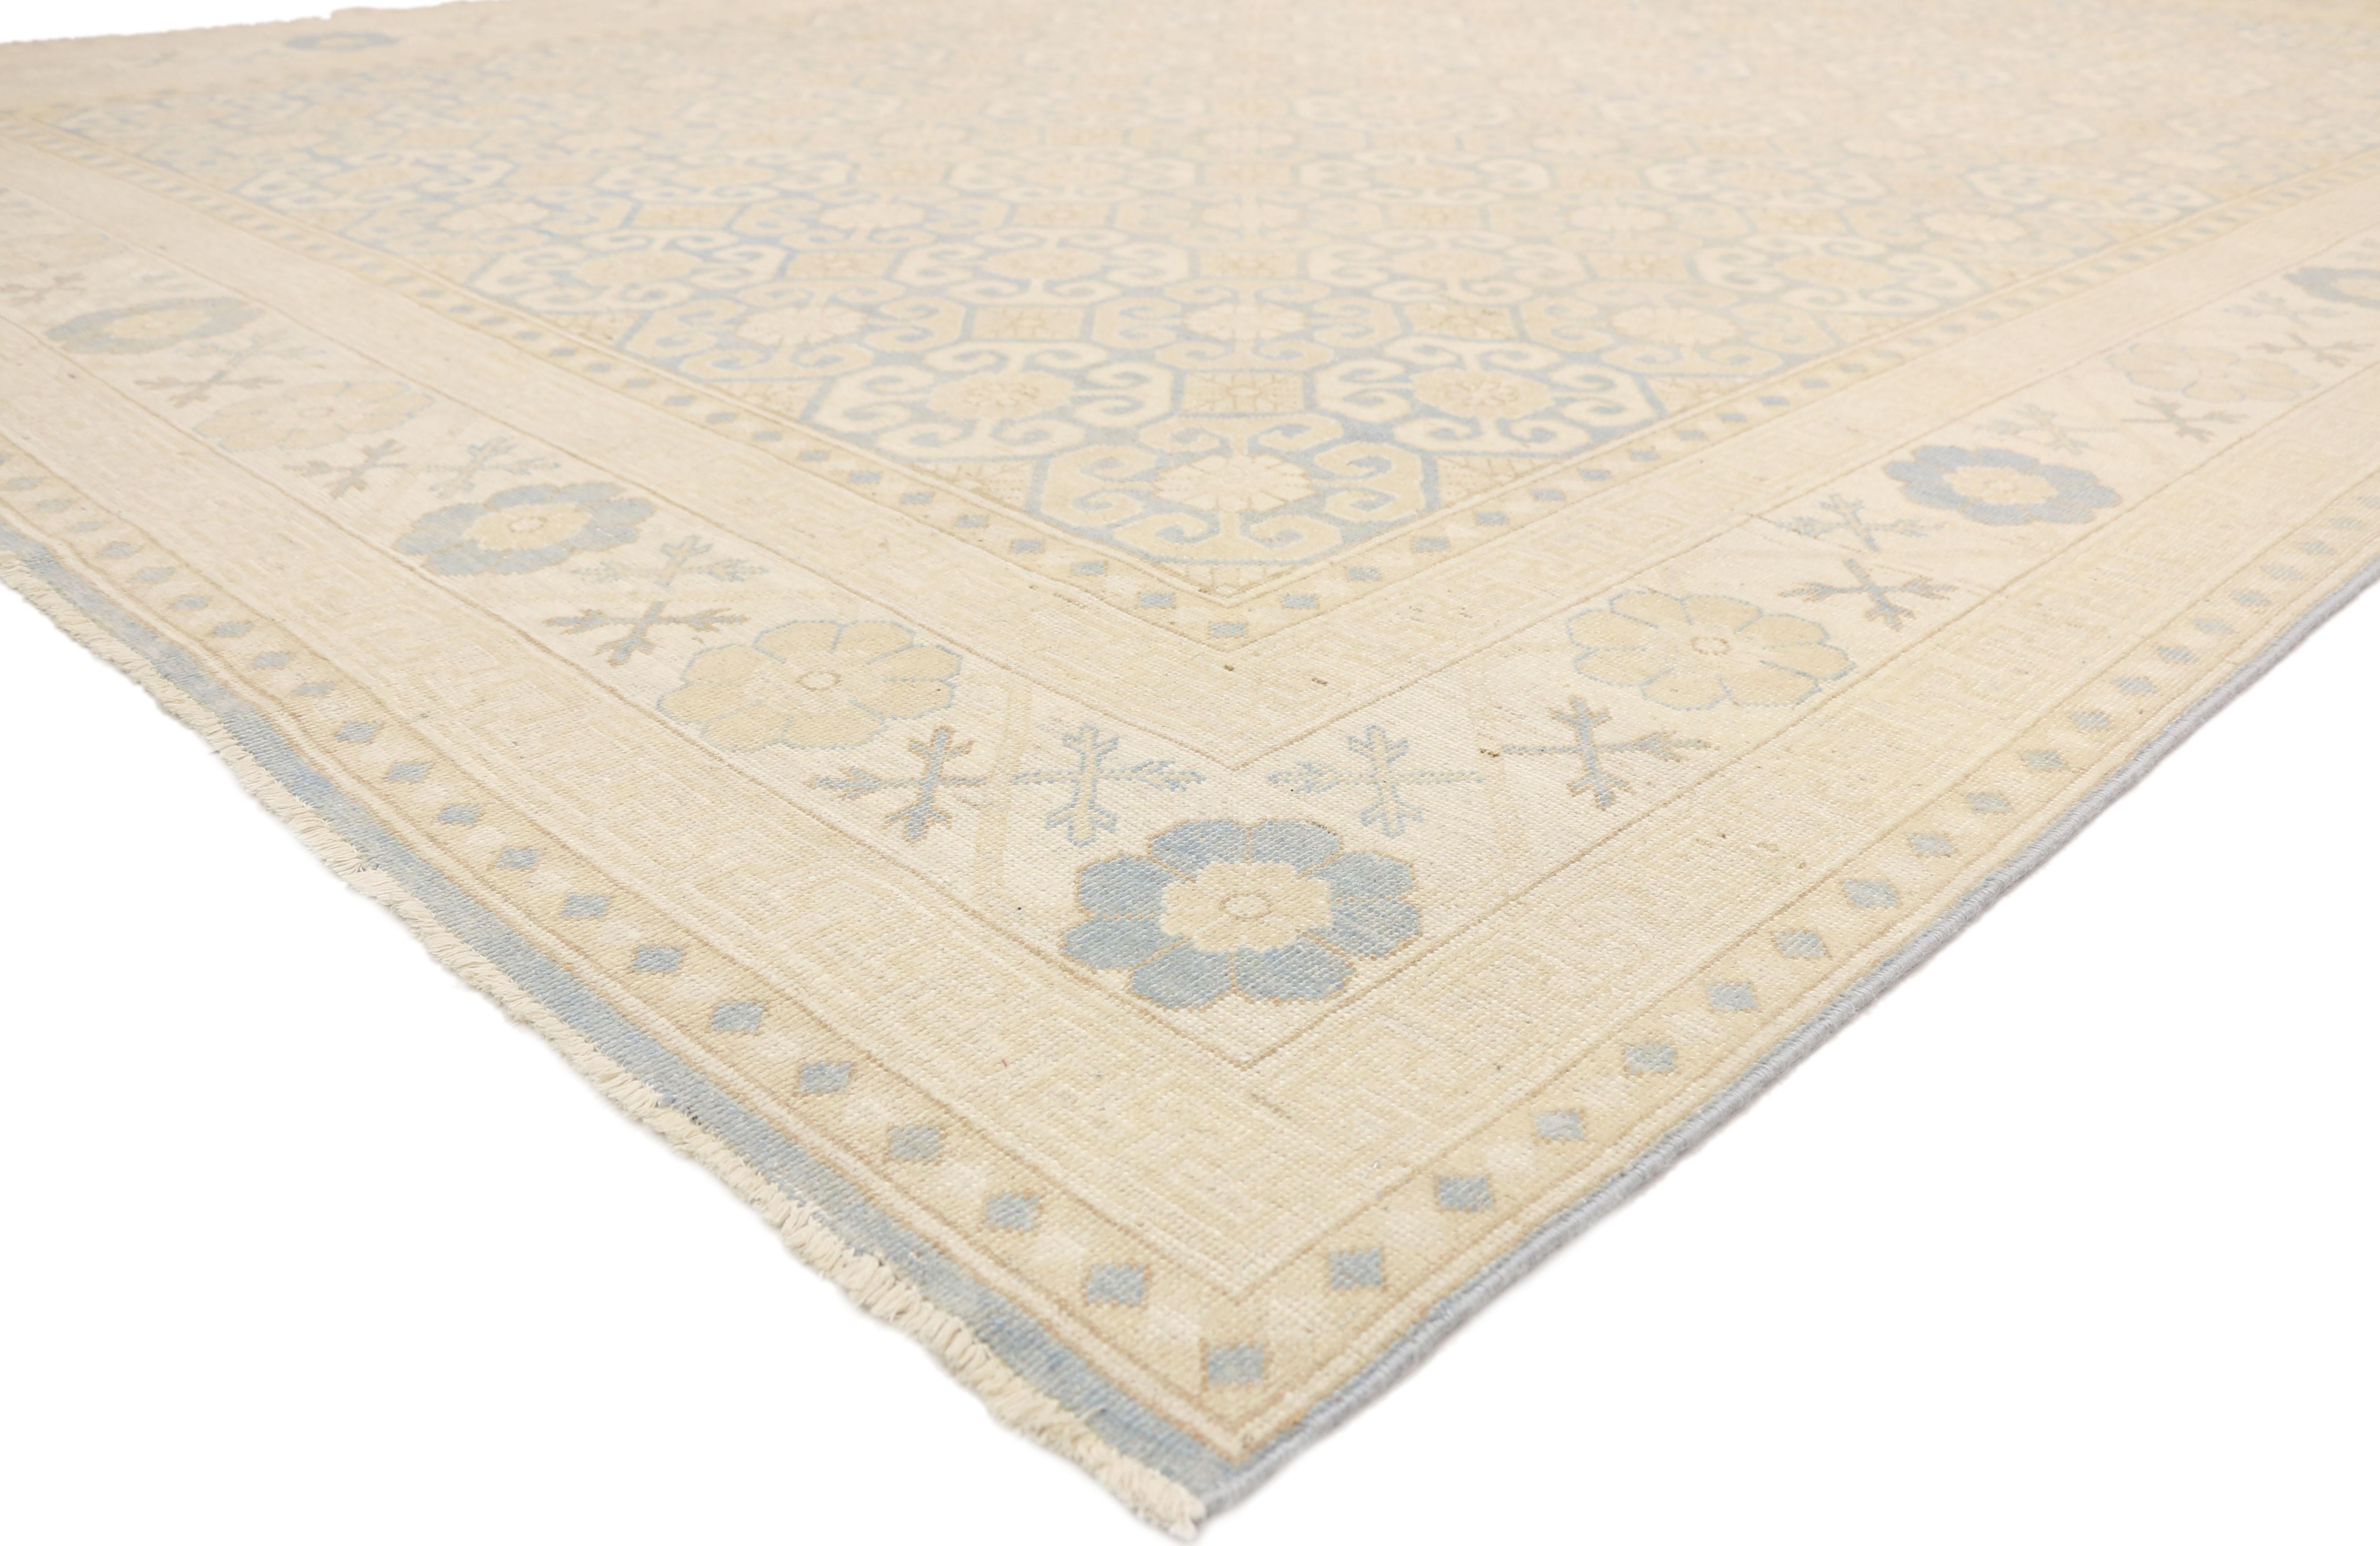 80174 New Transitional Khotan Area Rug with Hamptons Chic Style, Cozy Cottage Vibes 10'02 x 13'07. Representing a stylish union of traditional and modern, this sophisticated chic Khotan style rug features a traditional medallion composition of